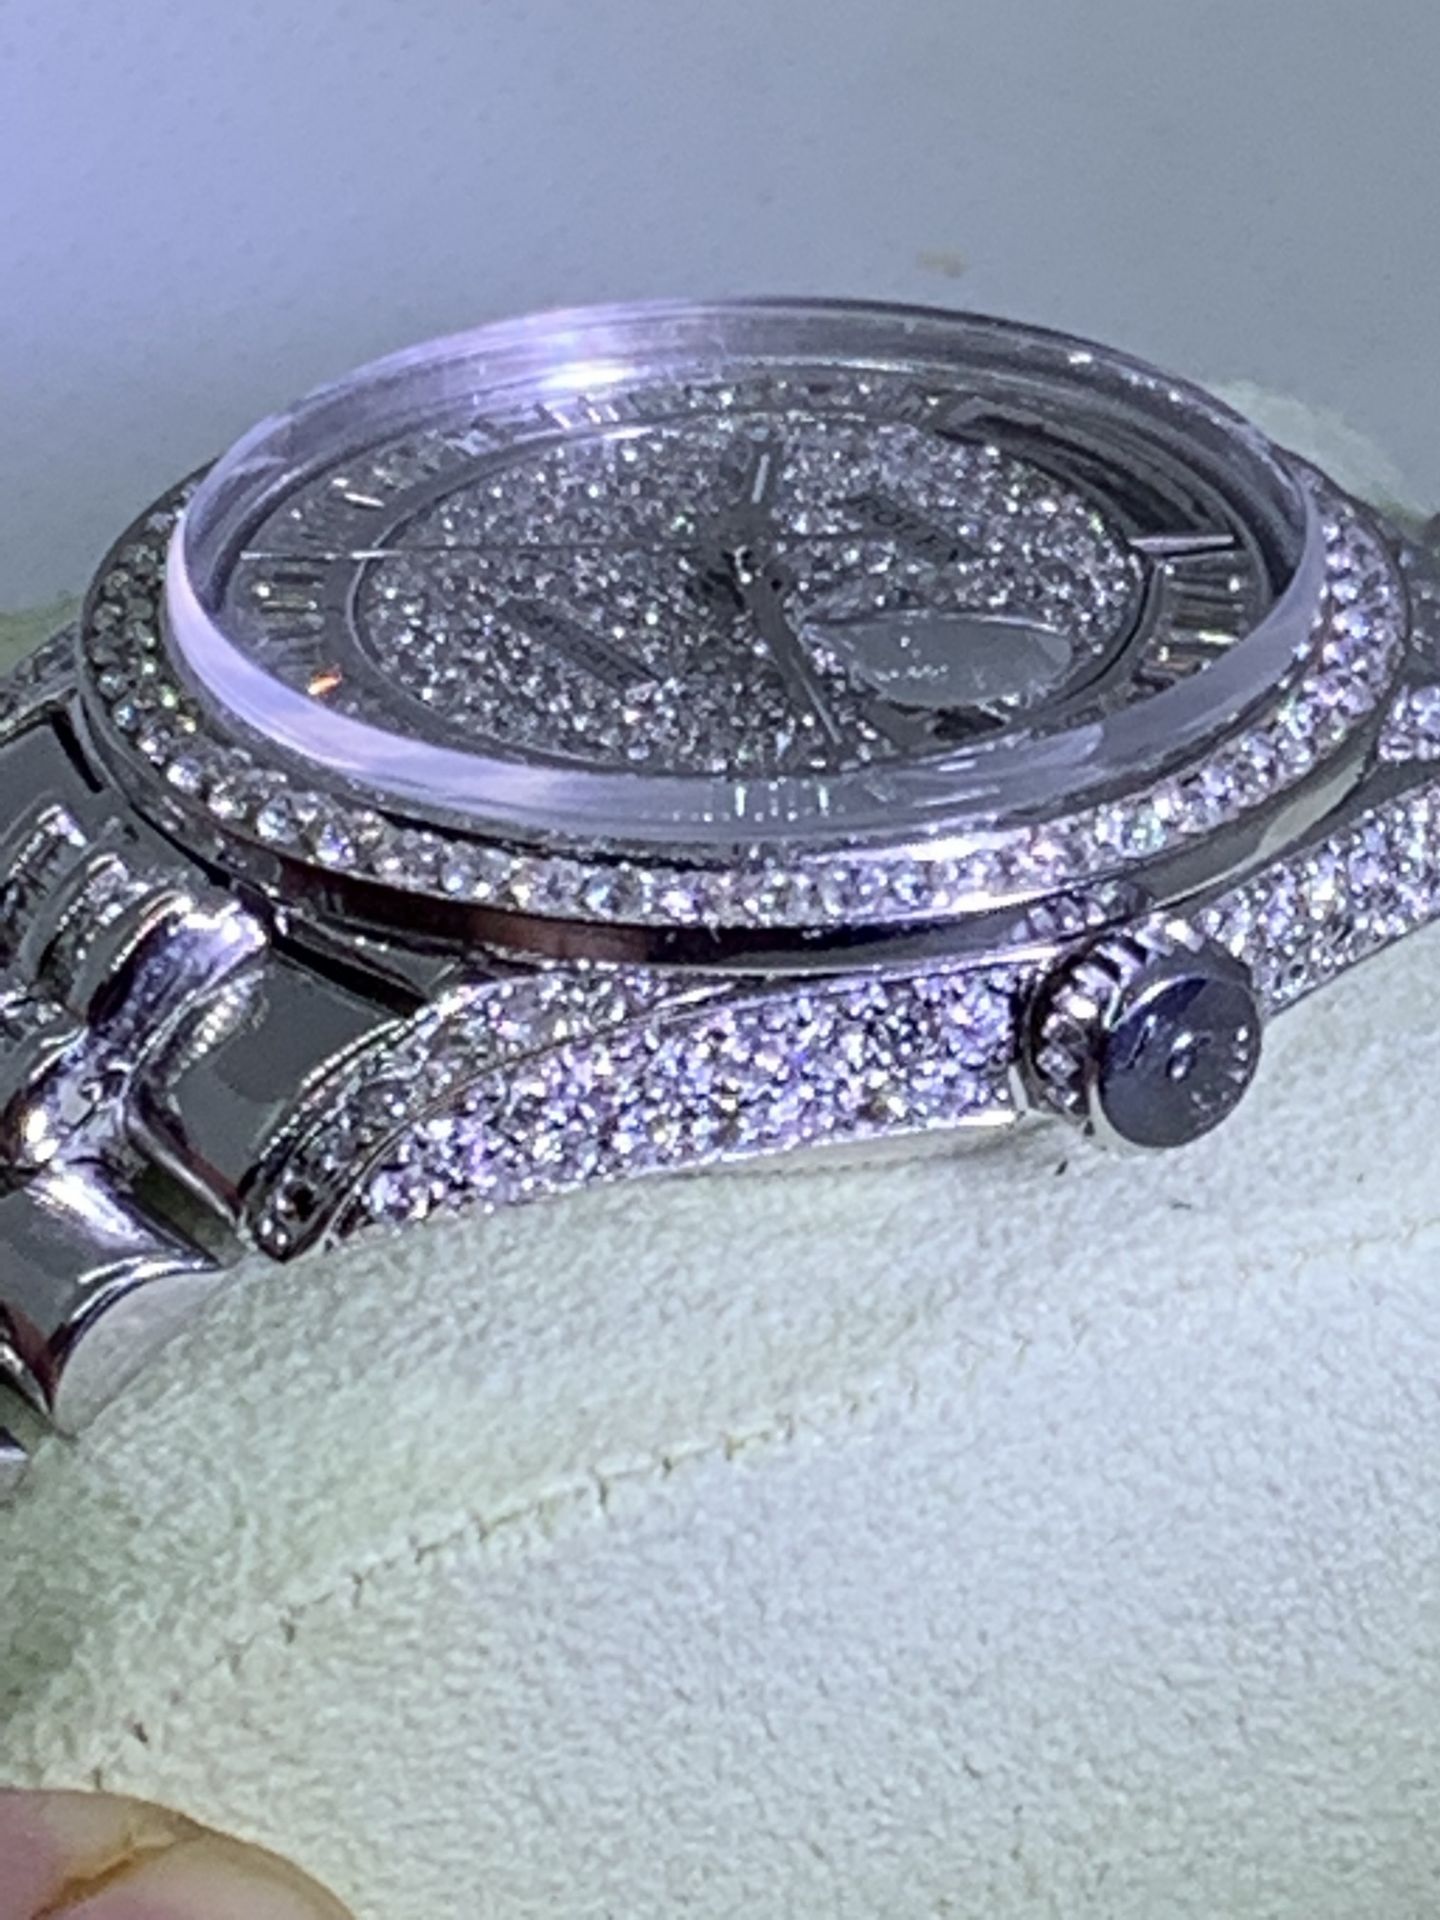 Diamond Encrusted Mens 36mm Day-Date, Solid White Gold - Diamond/ “Super President” Marked ROLEX - Image 16 of 18